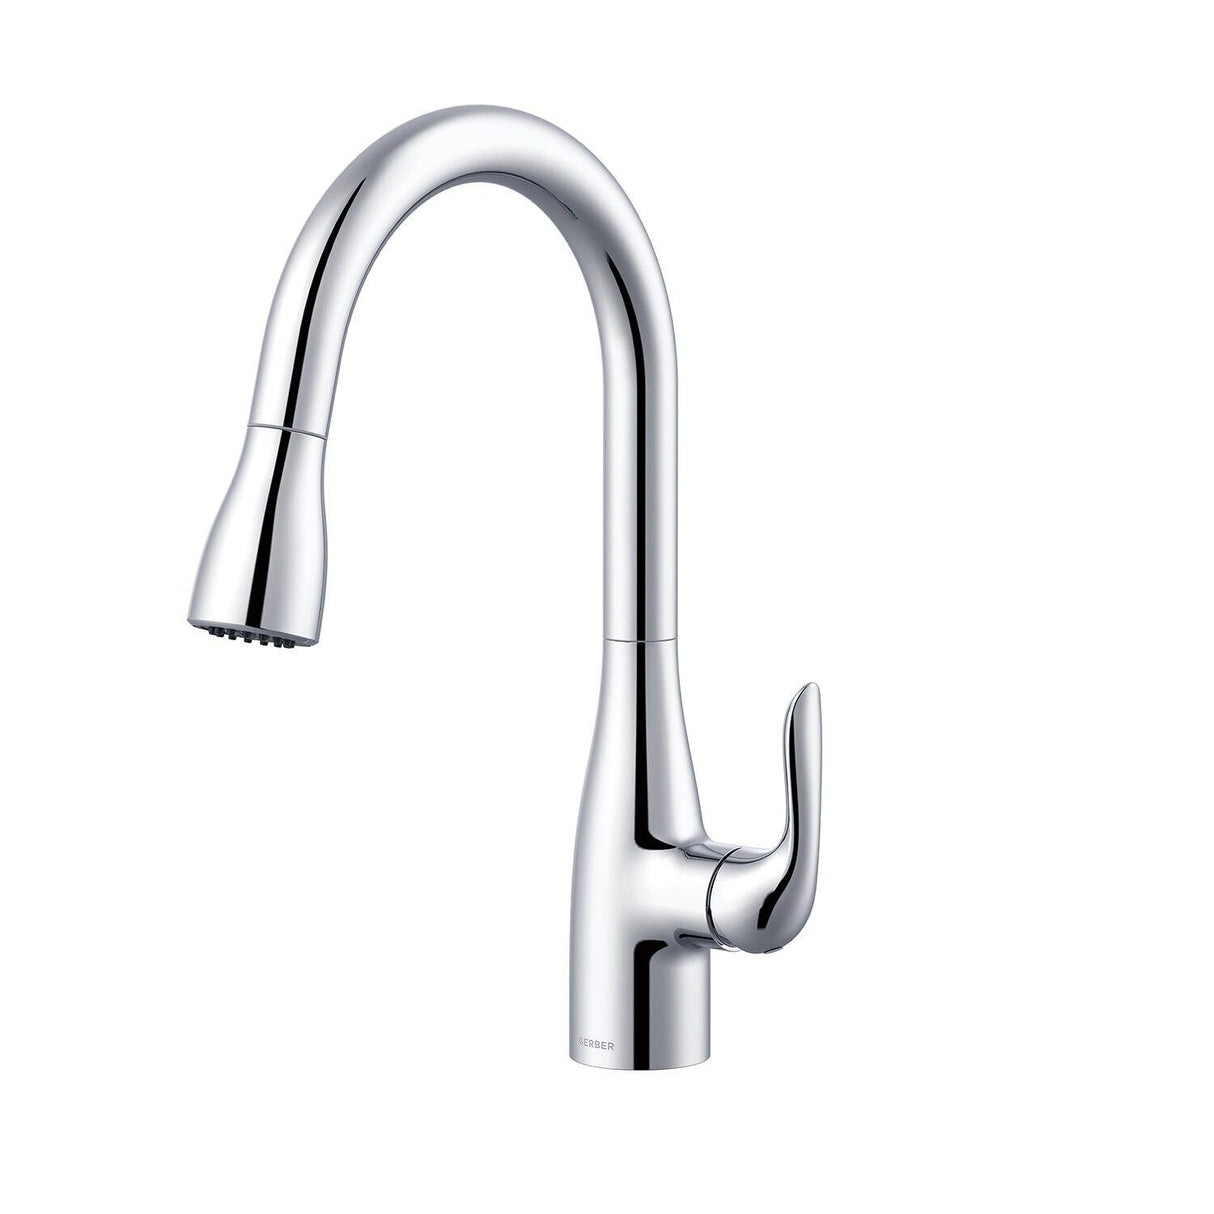 Gerber G0040164SS Viper Single Handle Pull-down Kitchen Faucet - Stainless Steel